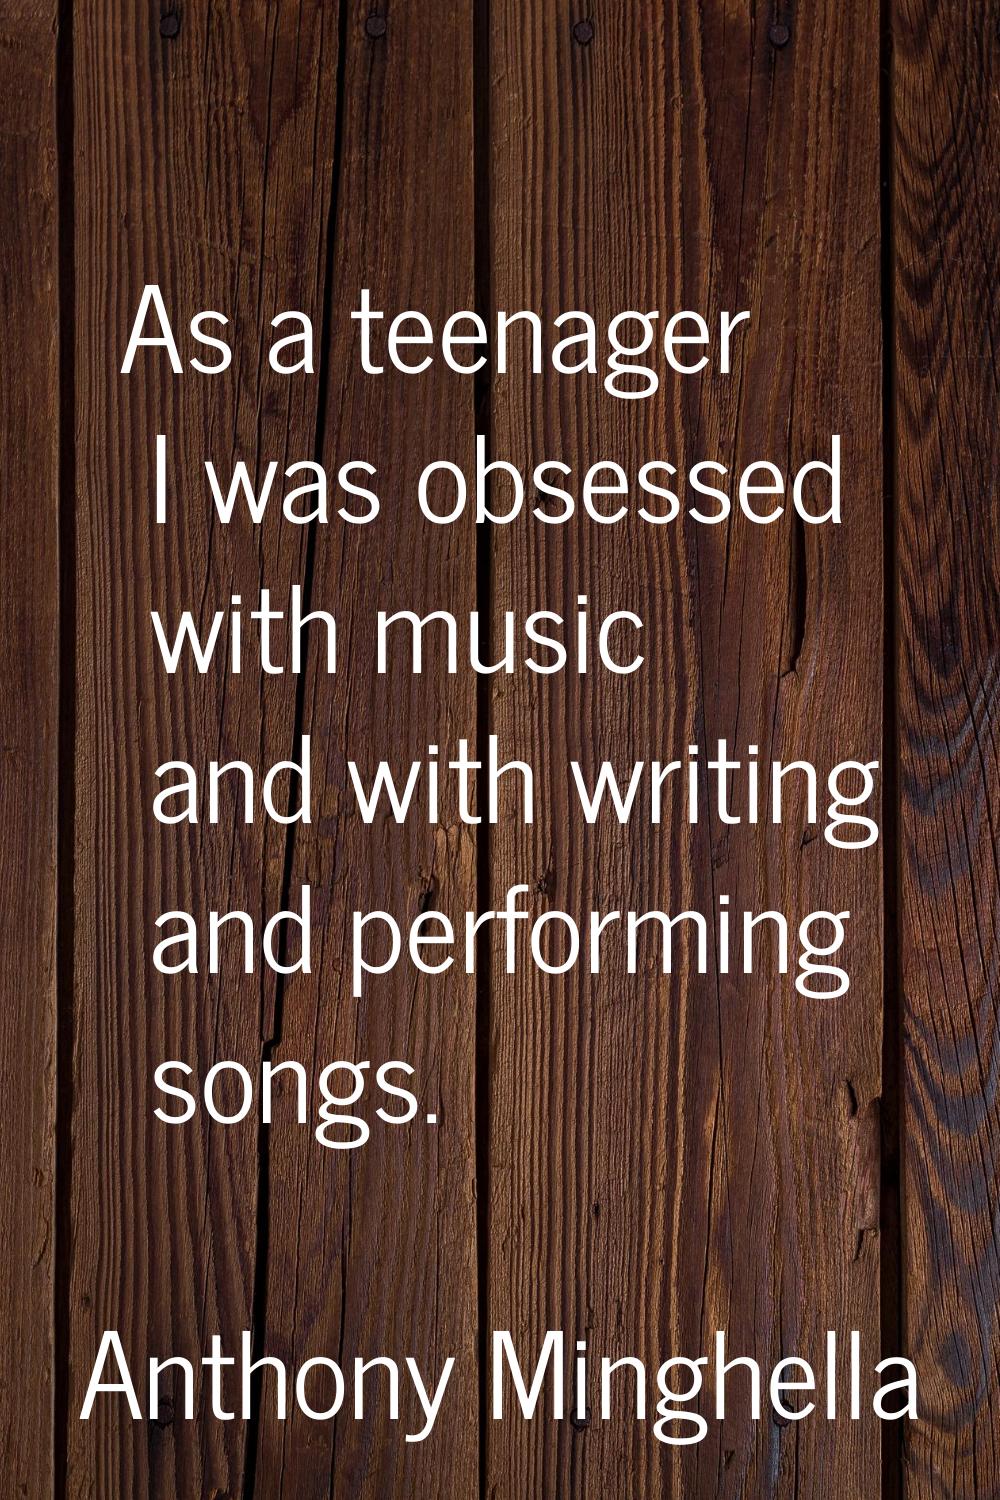 As a teenager I was obsessed with music and with writing and performing songs.